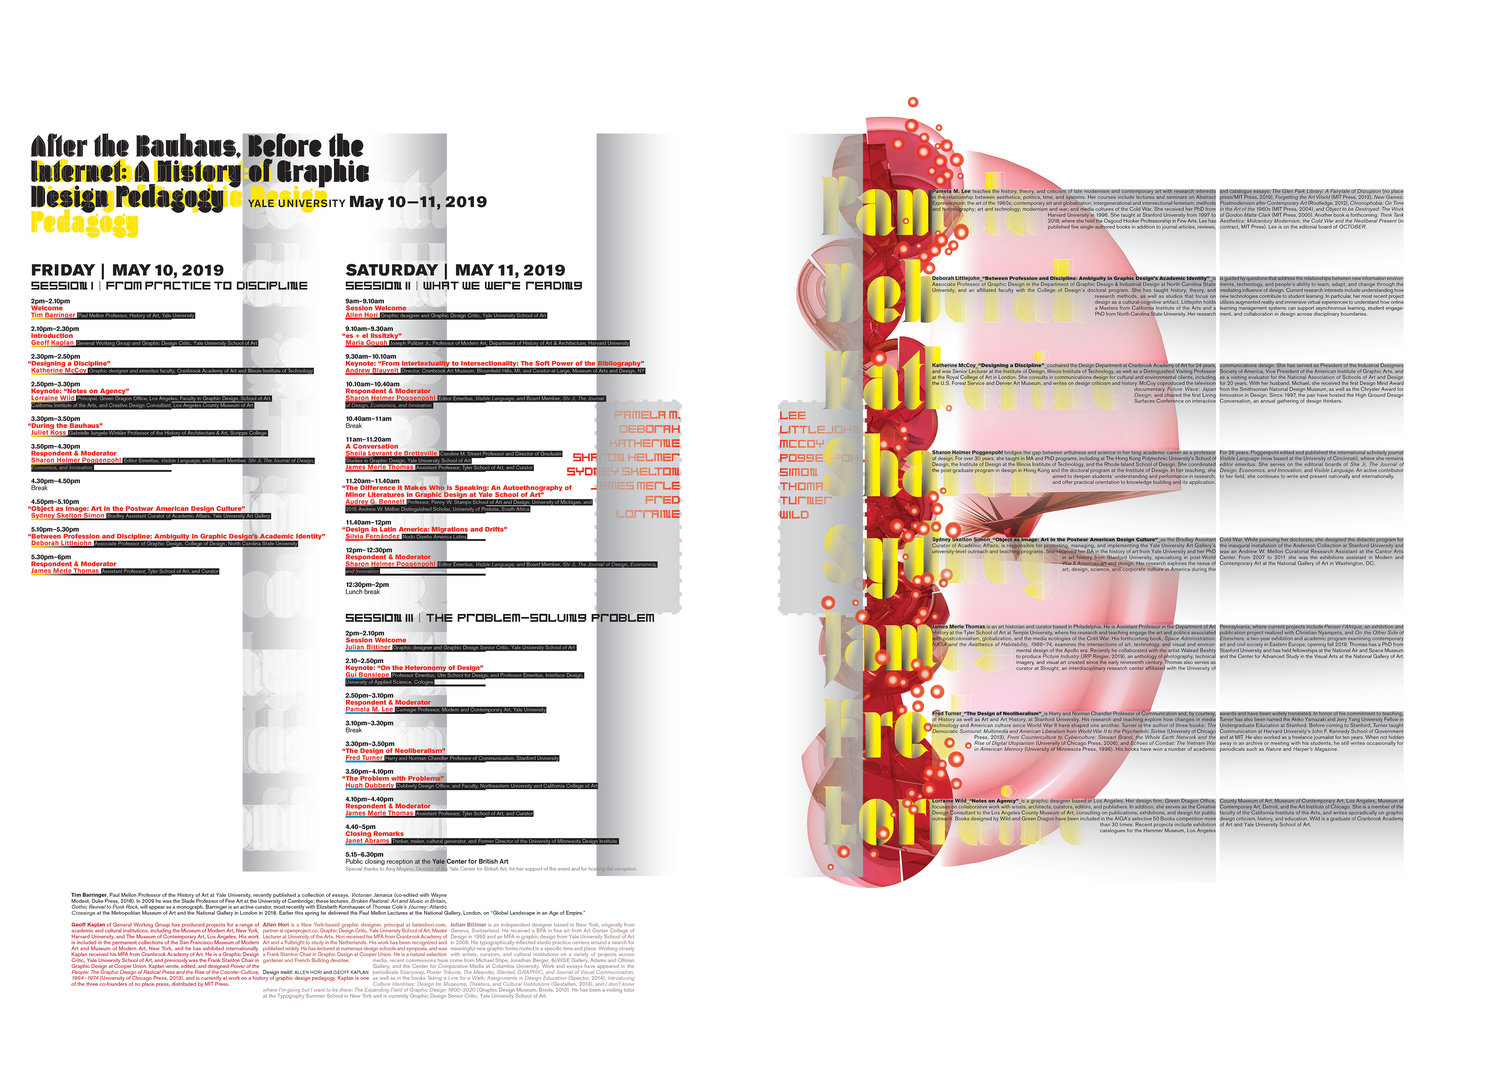 Conference schedule on a white, gray, pink, red and yellow abstract background that uses type as a design element